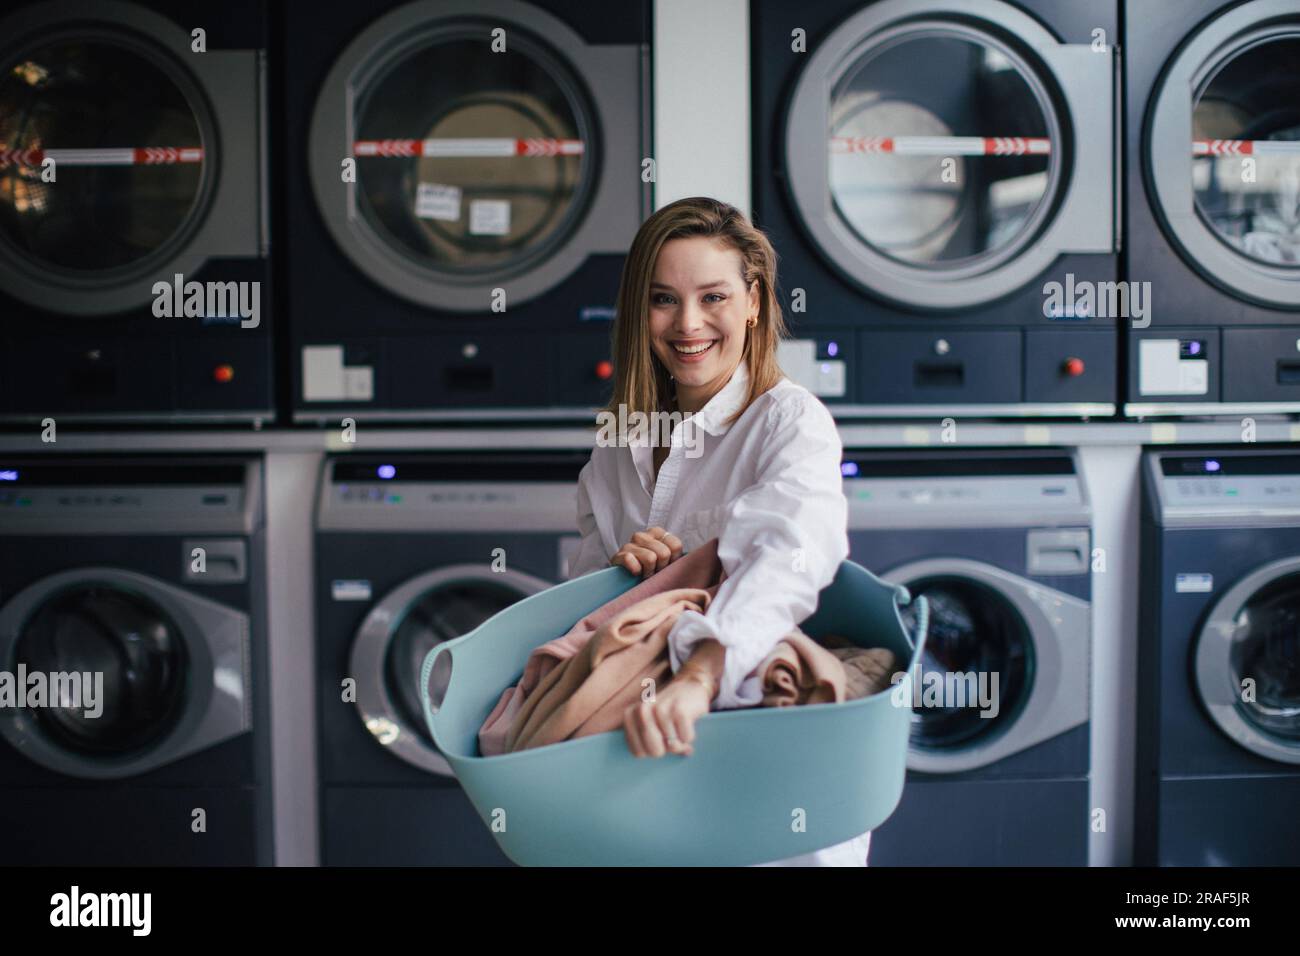 Young woman posing in a laundry room. Stock Photo